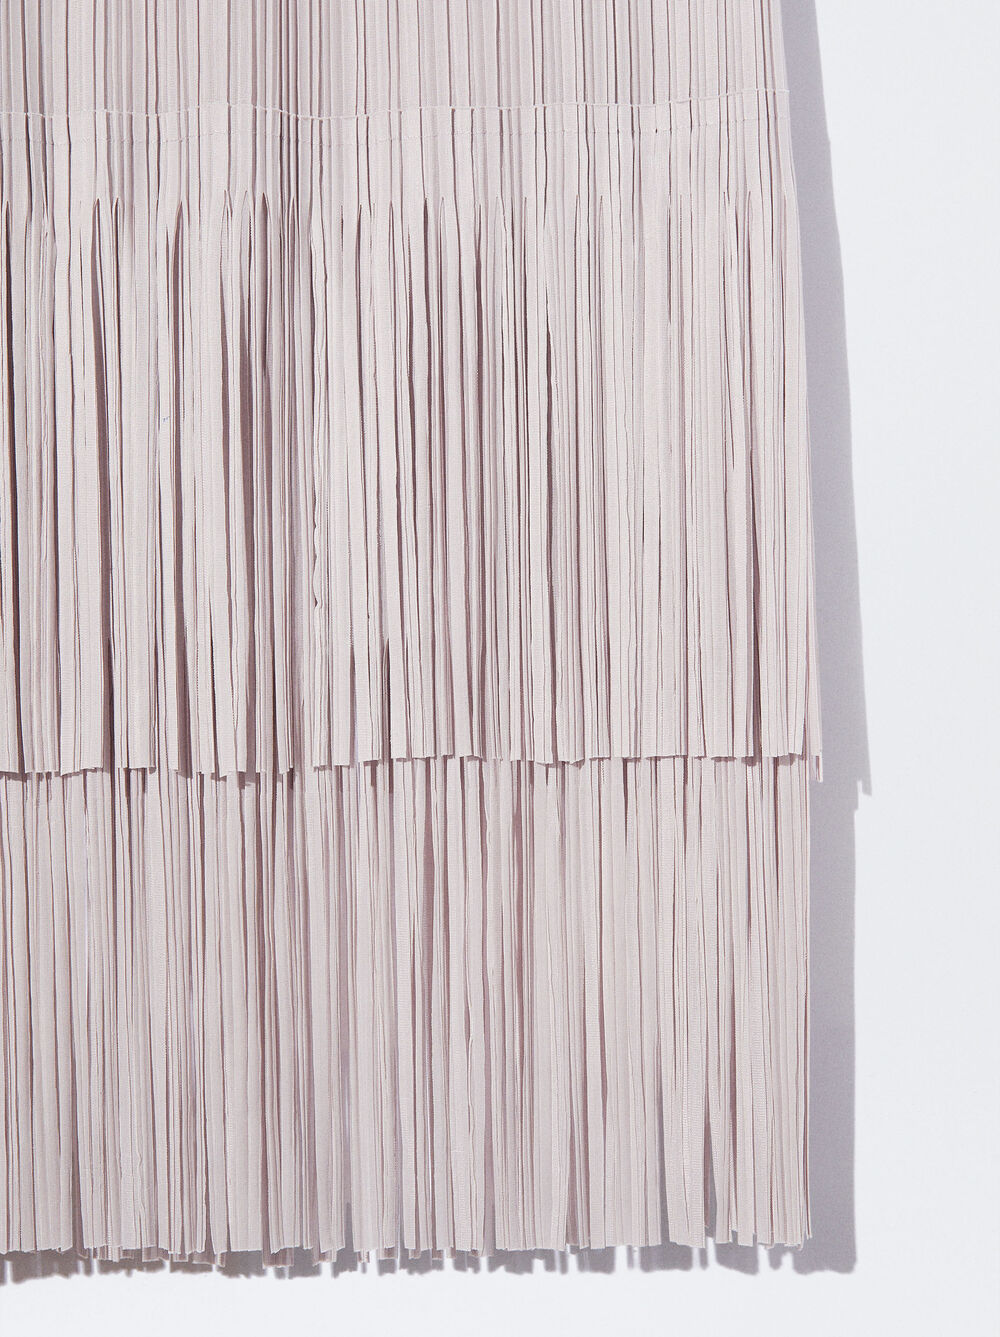 Pleated Skirt With Fringes